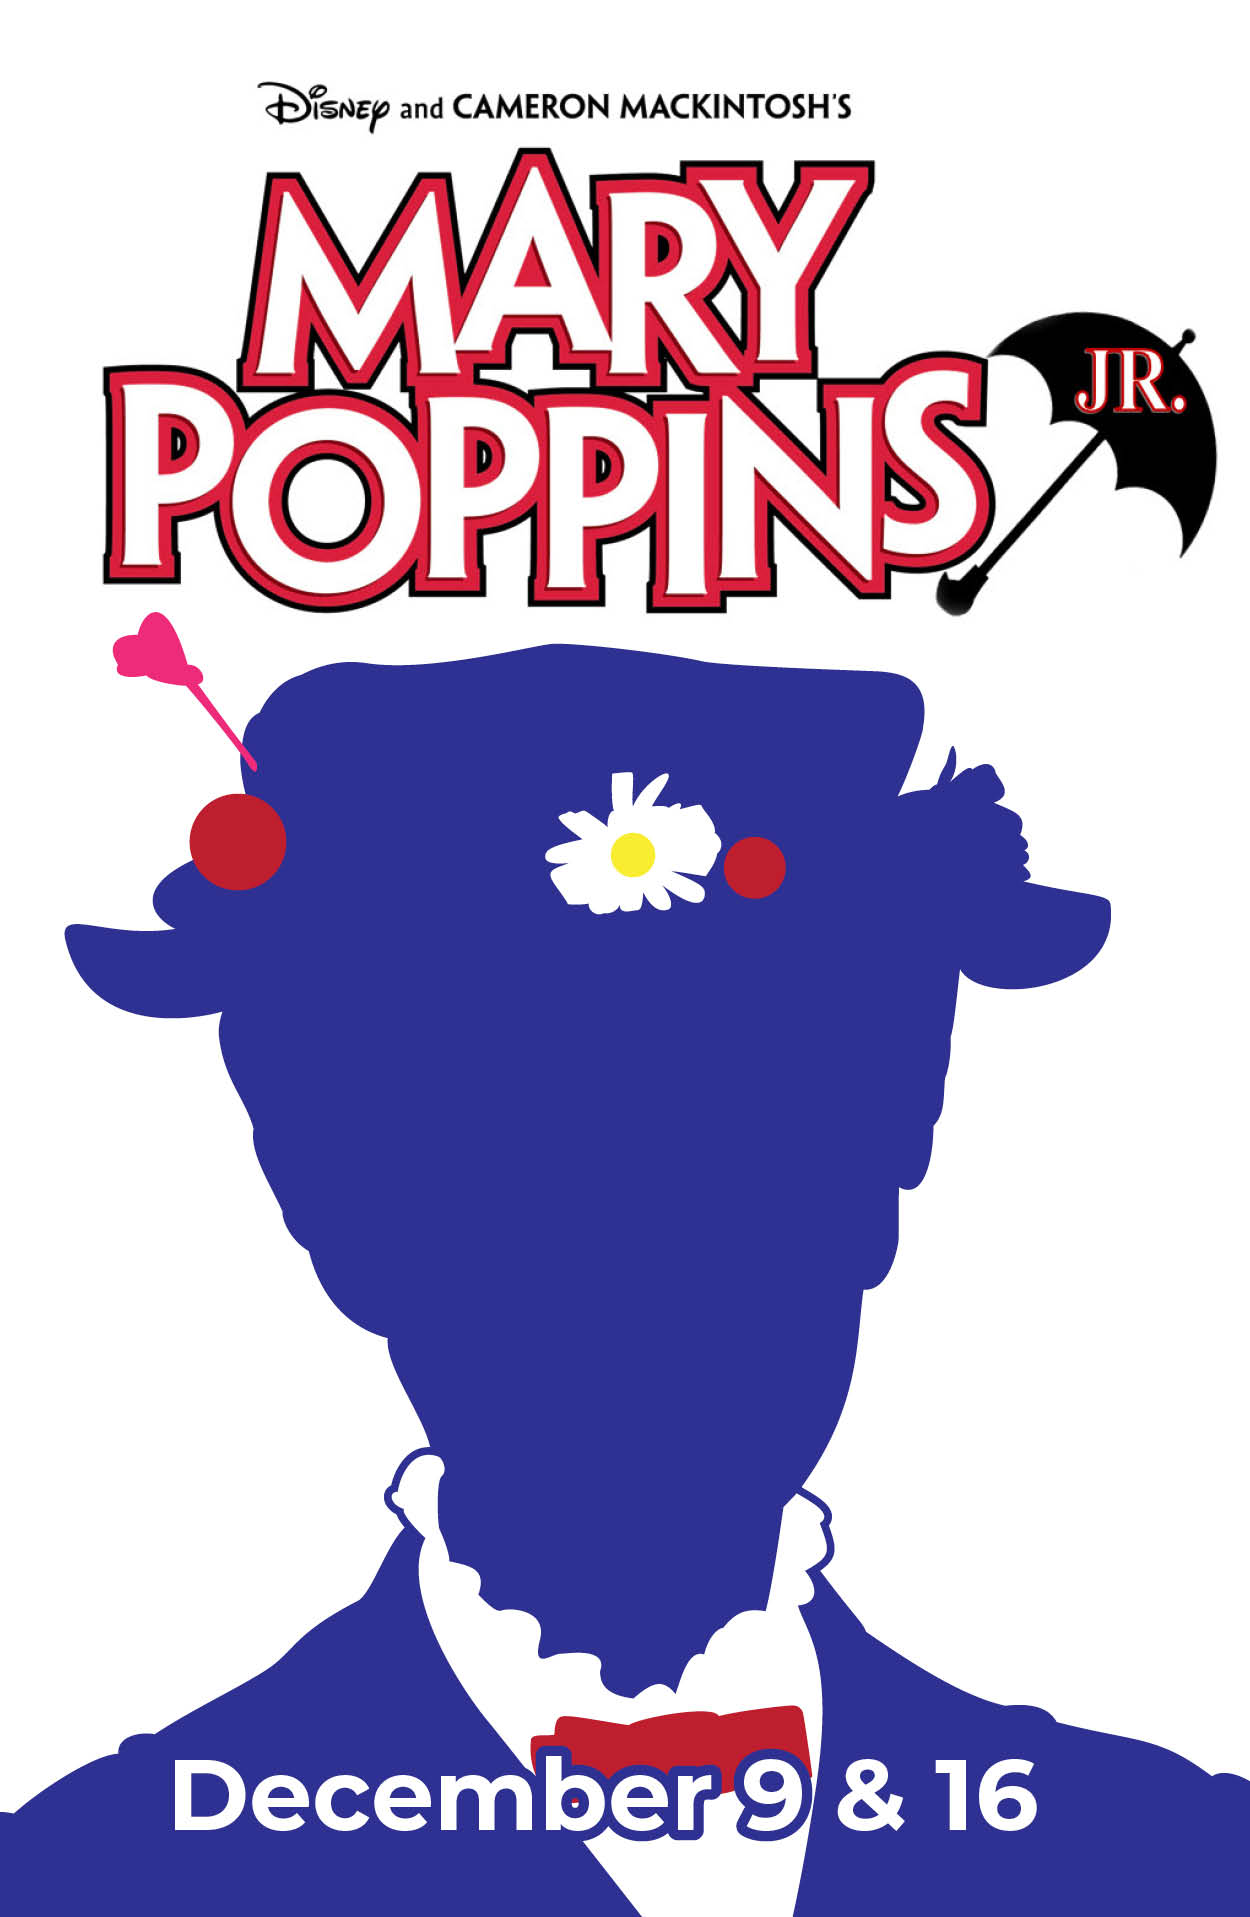 MaryPoppins_Events